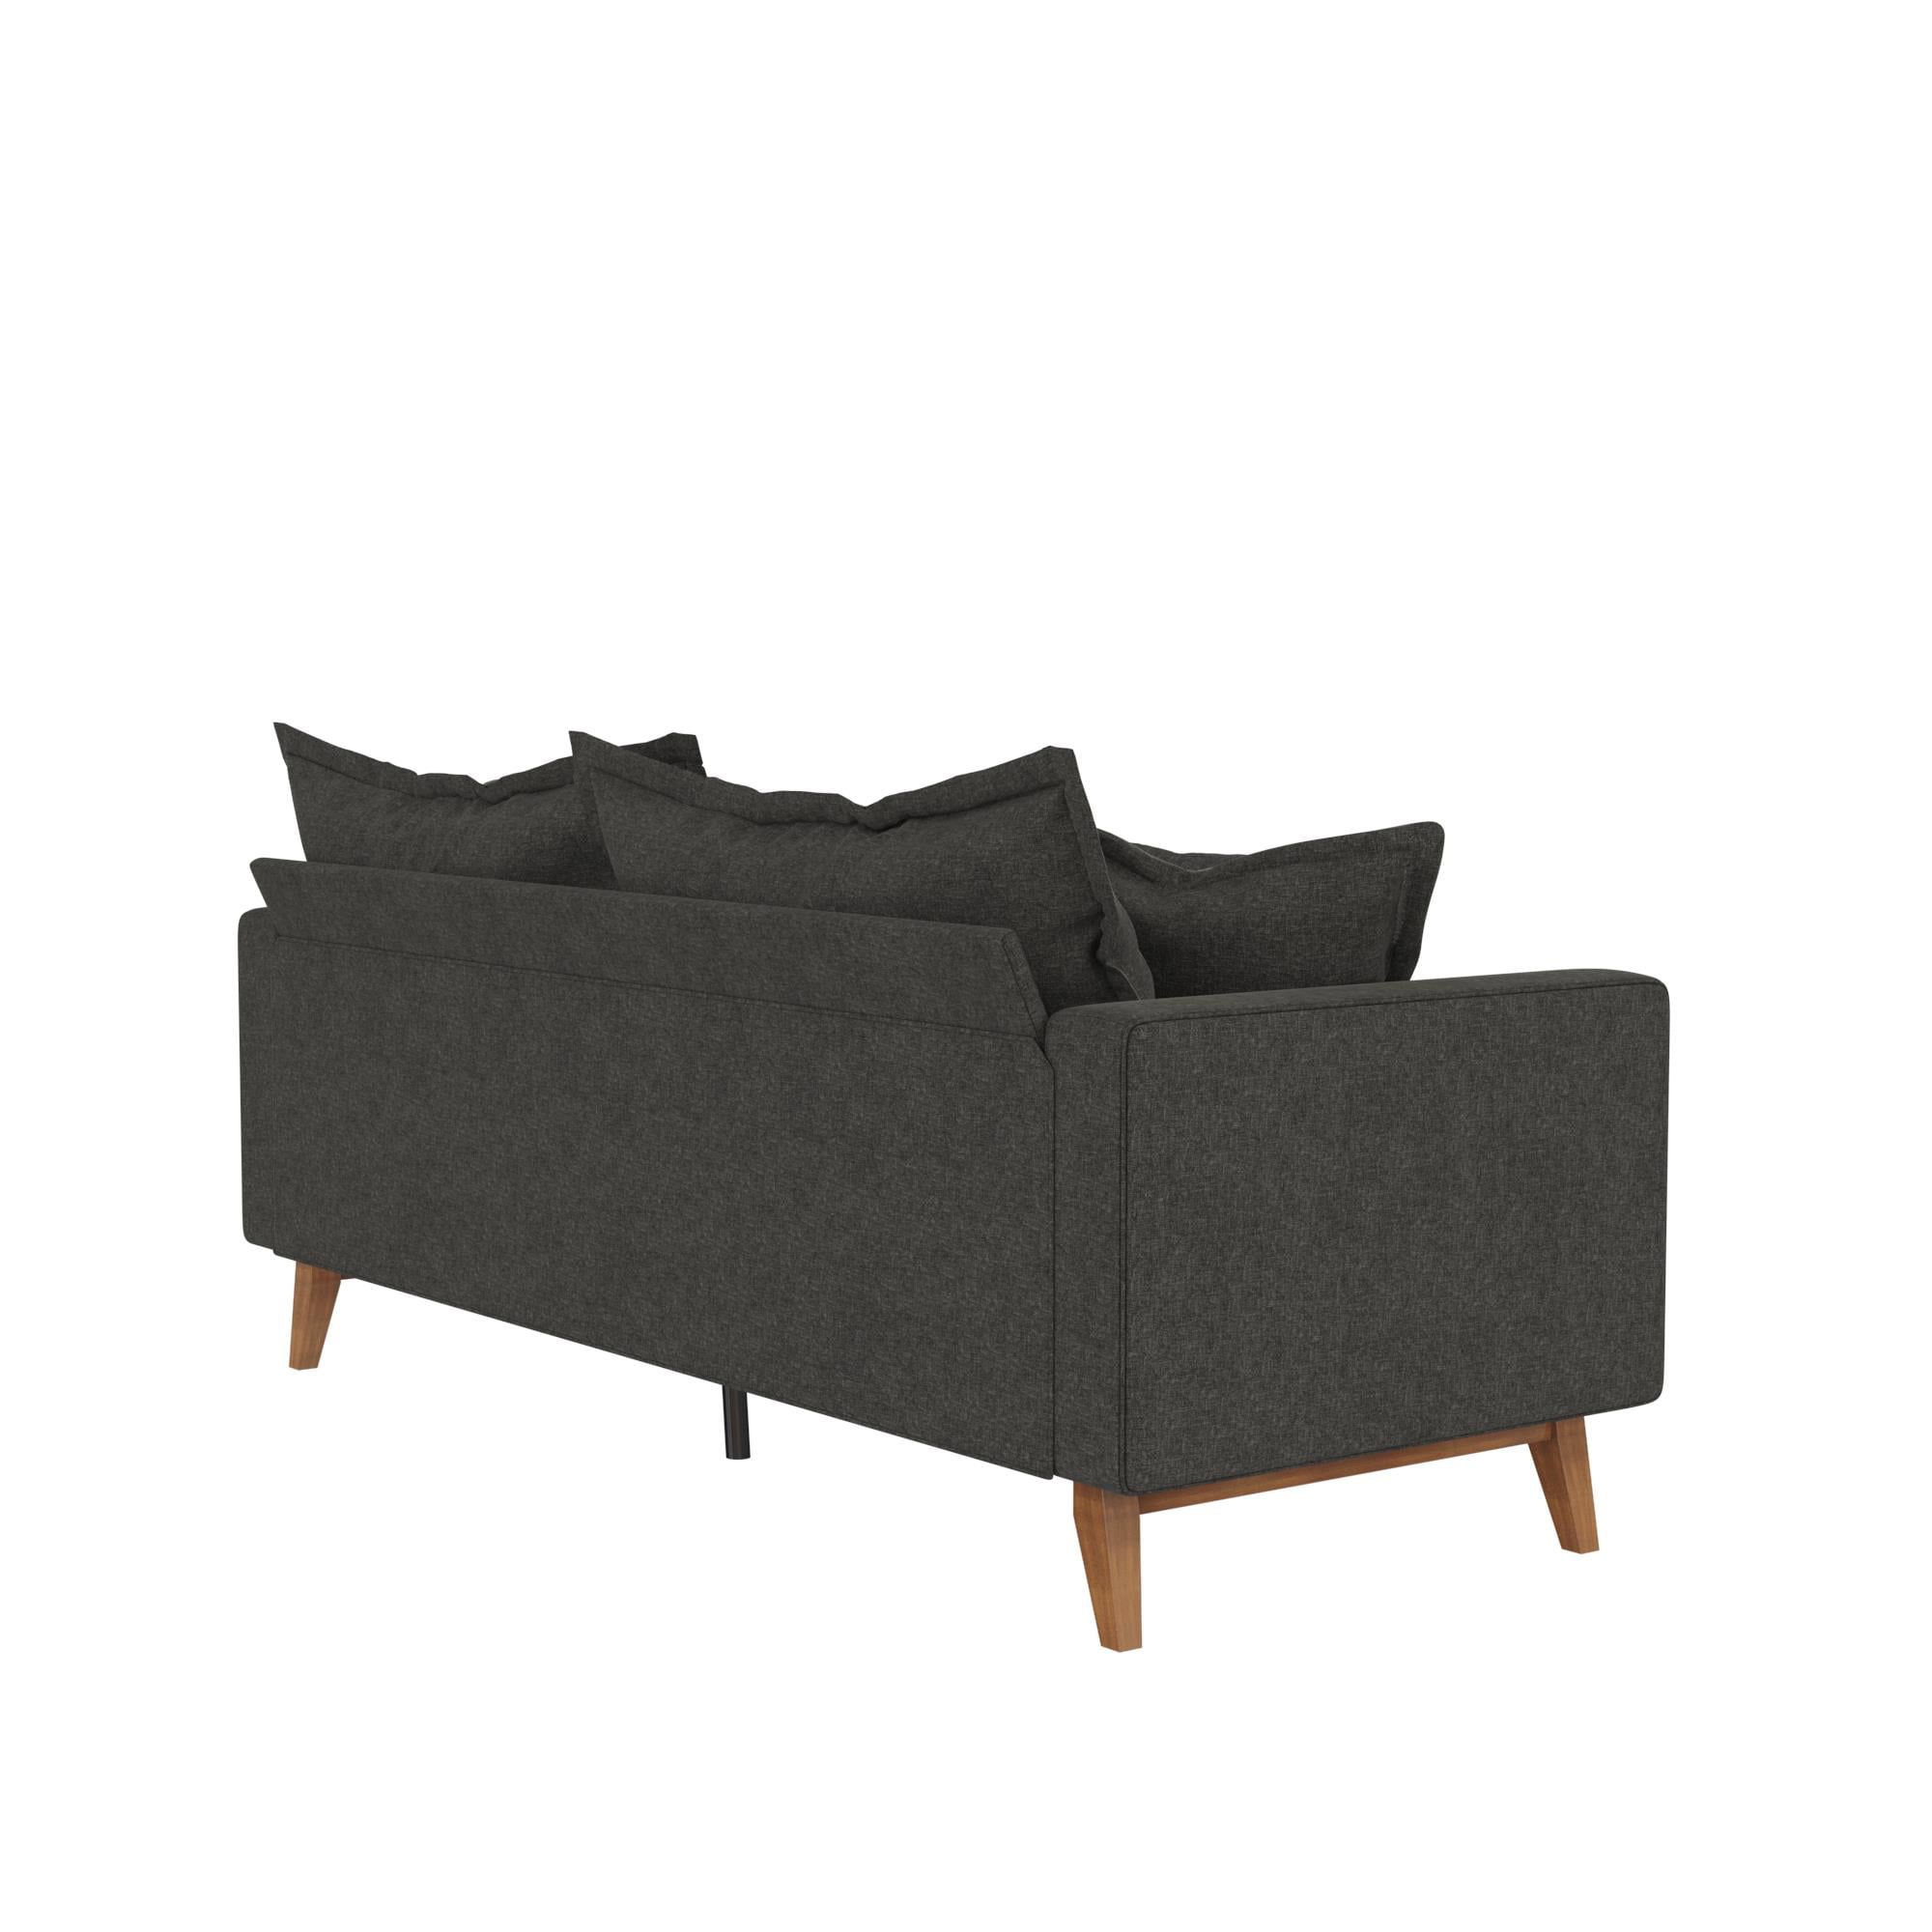 Dhp Miriam Pillowback Wood Base Sofa, Gray Linen – Walmart Throughout Sofas With Pillowback Wood Bases (View 15 of 20)